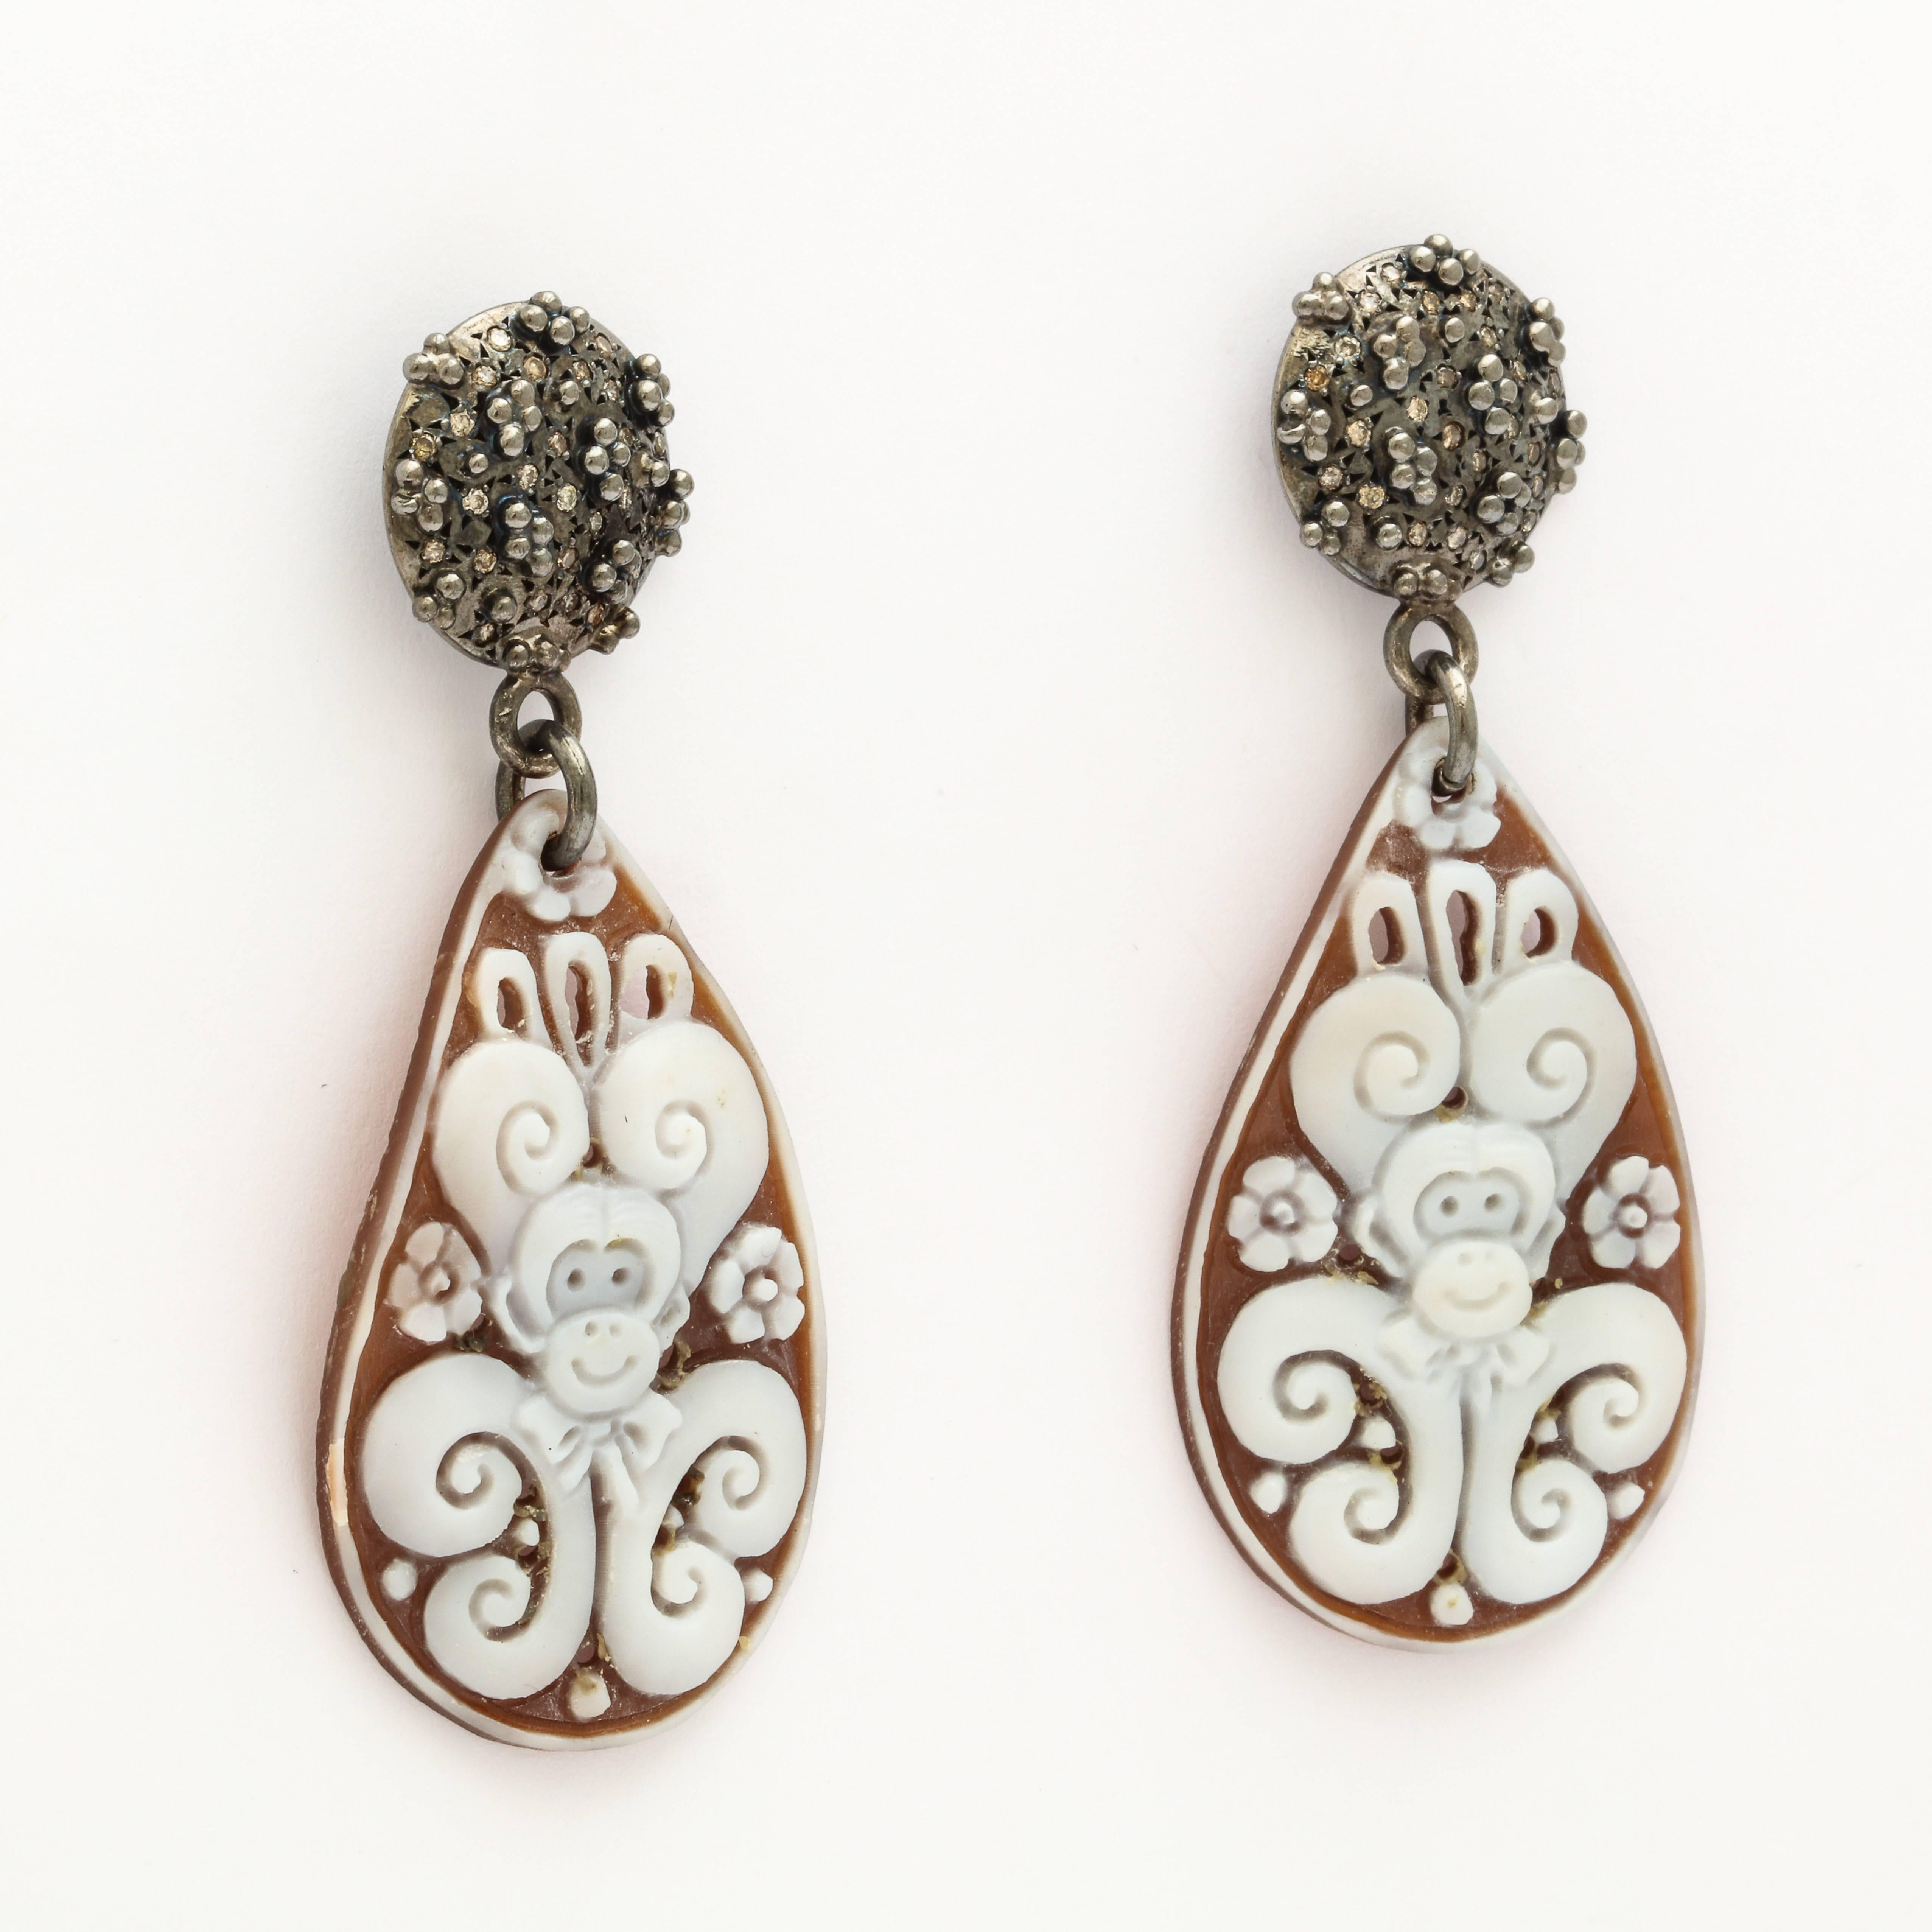 40mm sardonyx cameo hand-carved, set in sterling silver black rhodium plated  with brown diamonds.